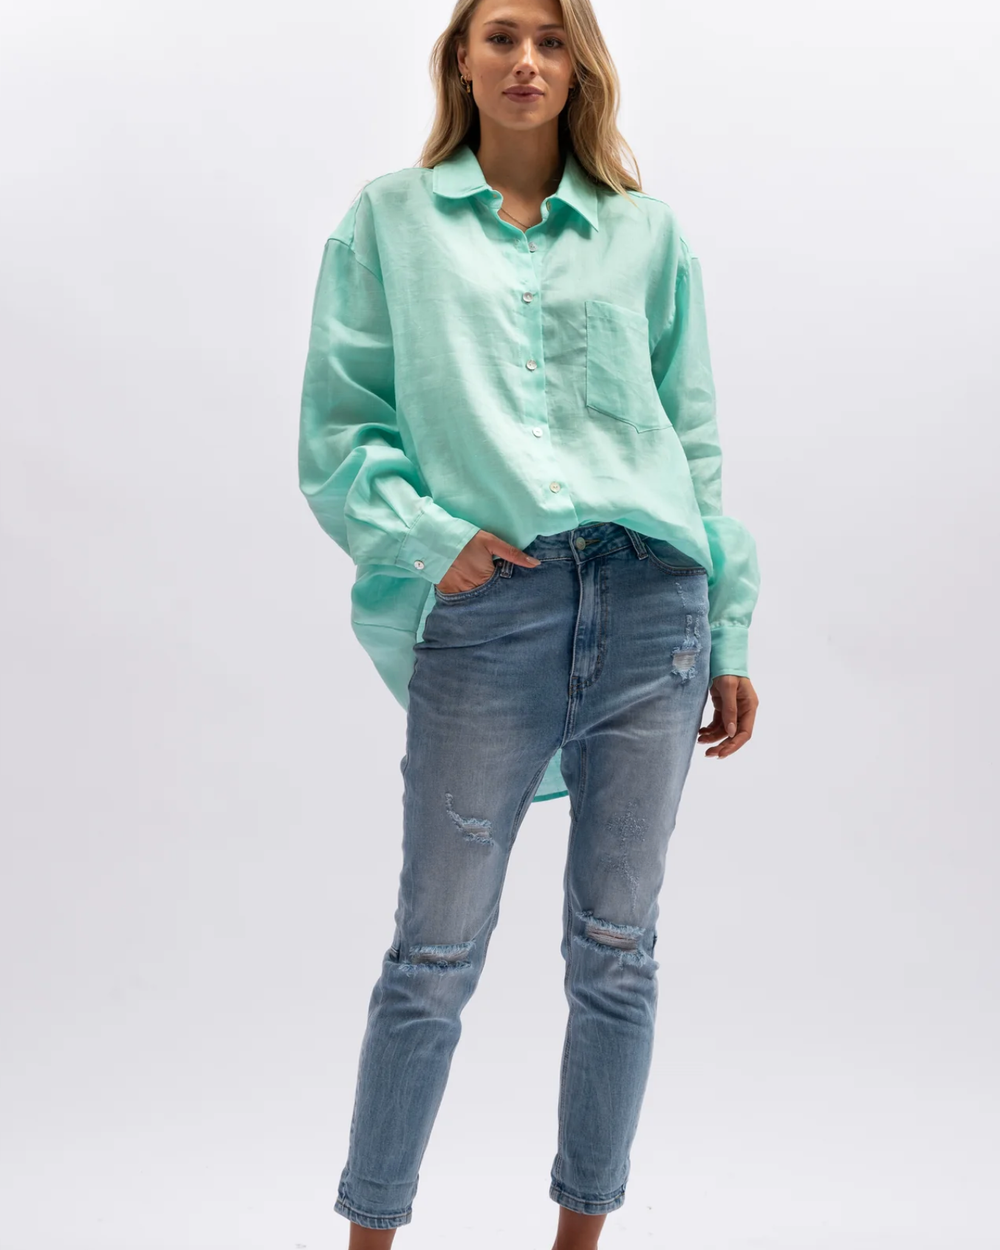 We Are The Others The The Boyfriend Jeans - Light Blue Wash